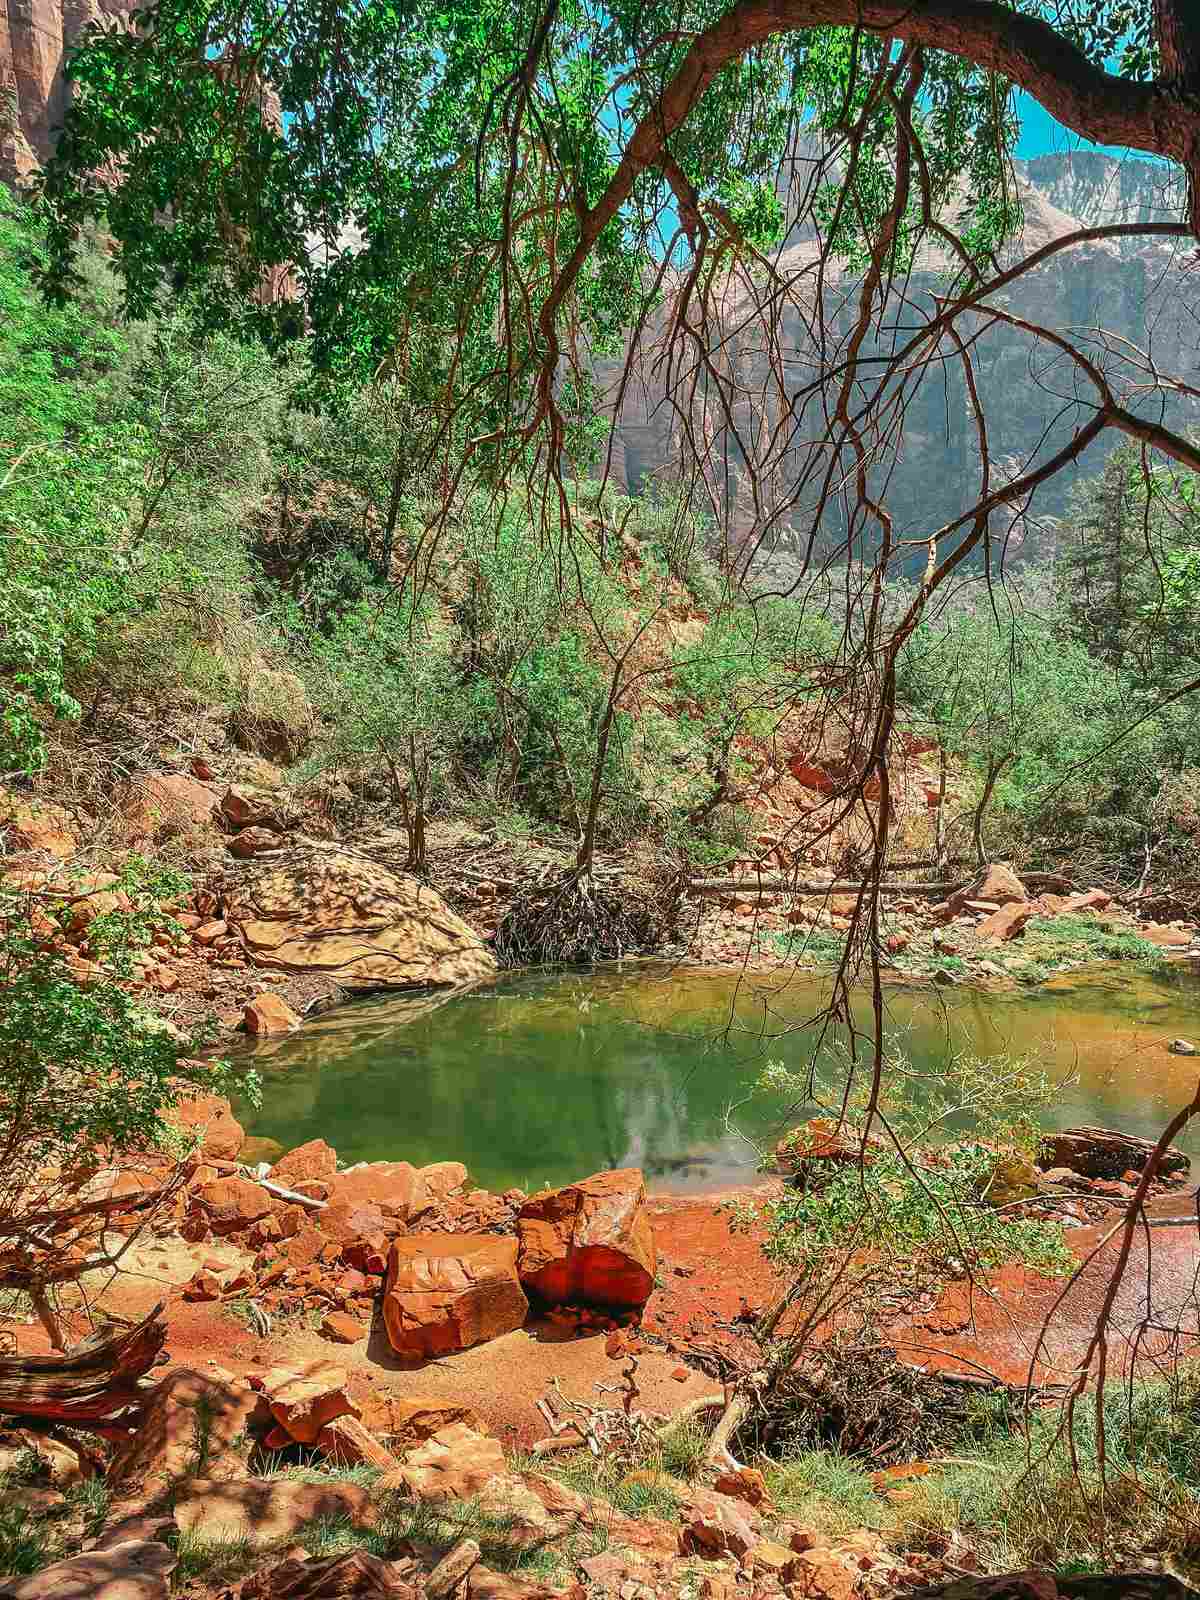 Emerald Pools trail at Zion National Park in Utah